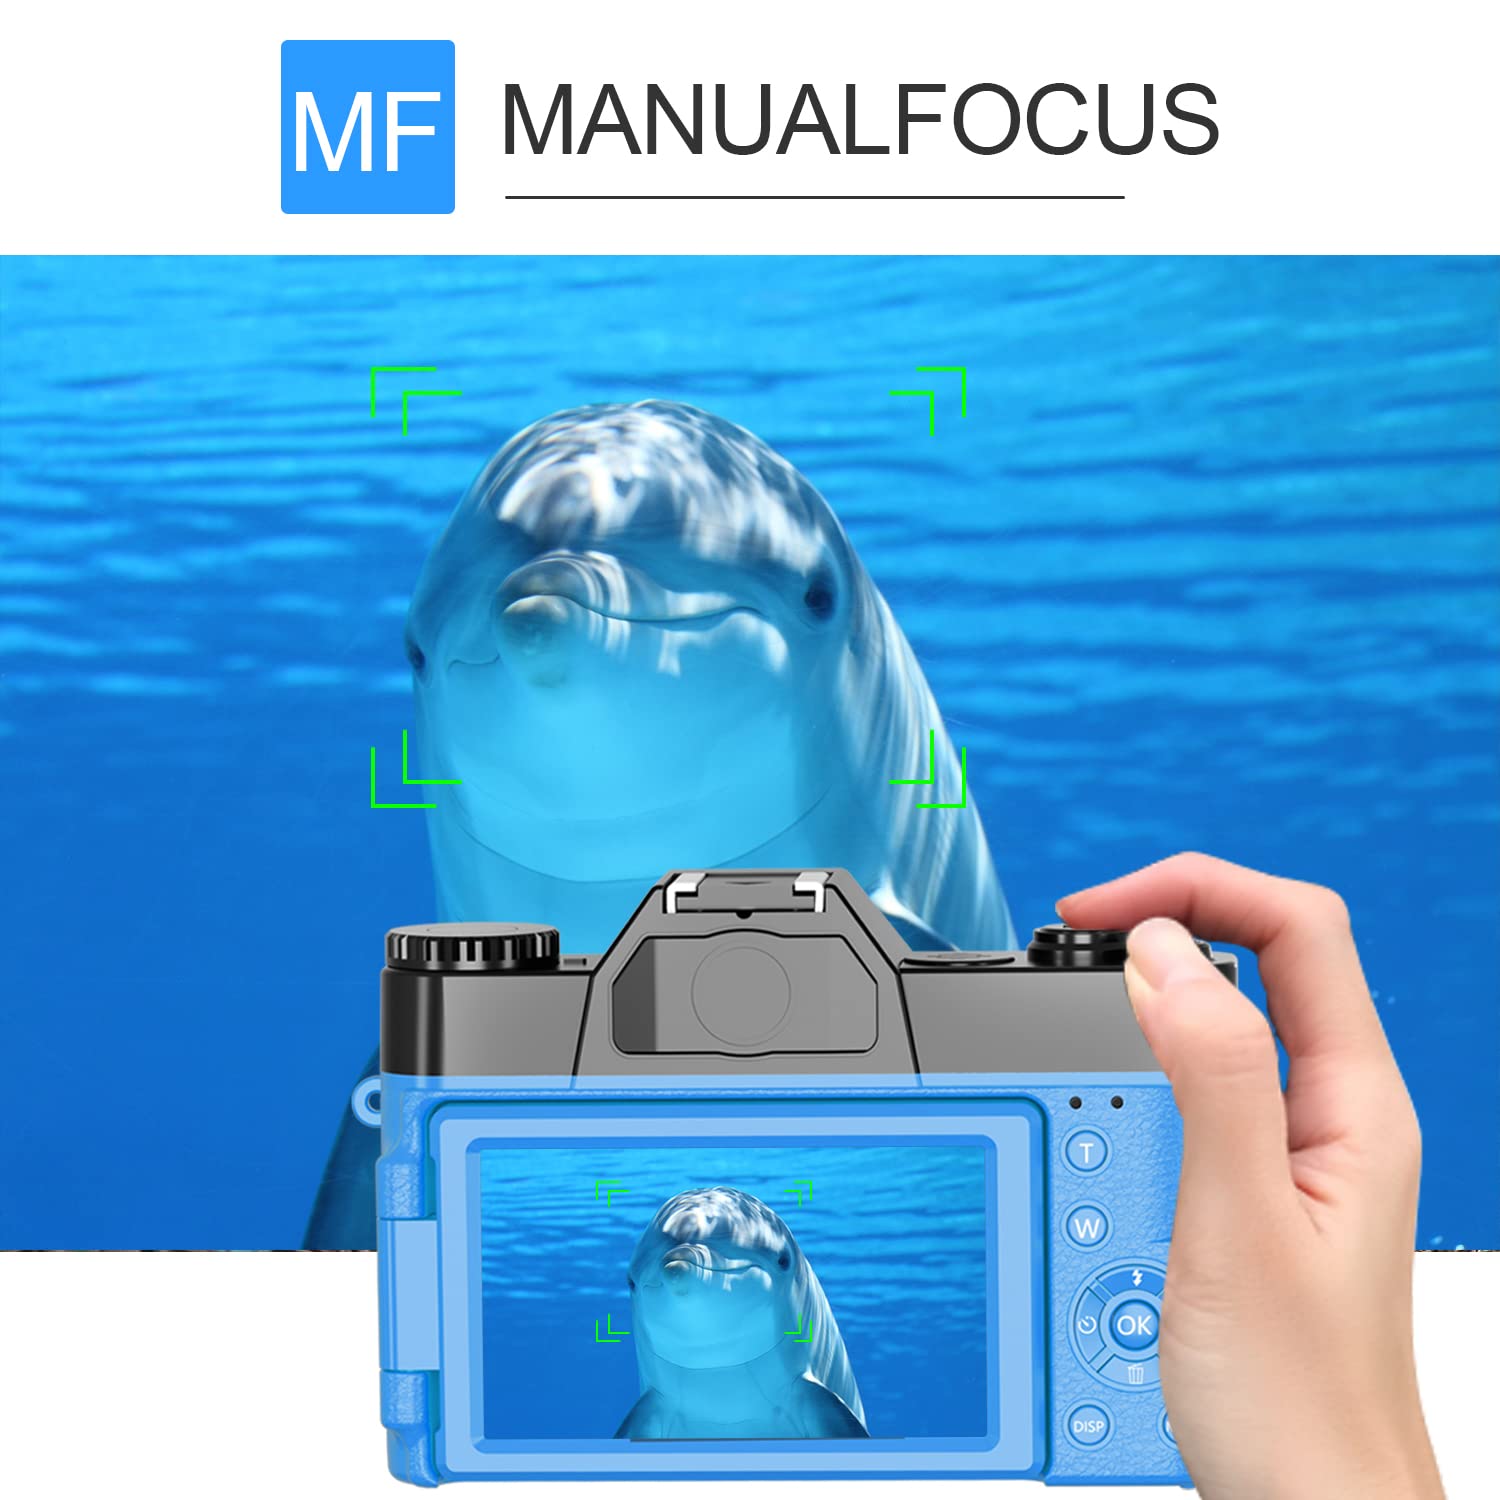 4K Digital Camera for Photography VJIANGER 48MP Vlogging Camera for YouTube with 3.0’’ 180° Flip Screen, WiFi, 16X Digital Zoom, Wide Angle & Macro Lens, 2 Batteries, 32GB Micro SD Card(W02-Blue30)